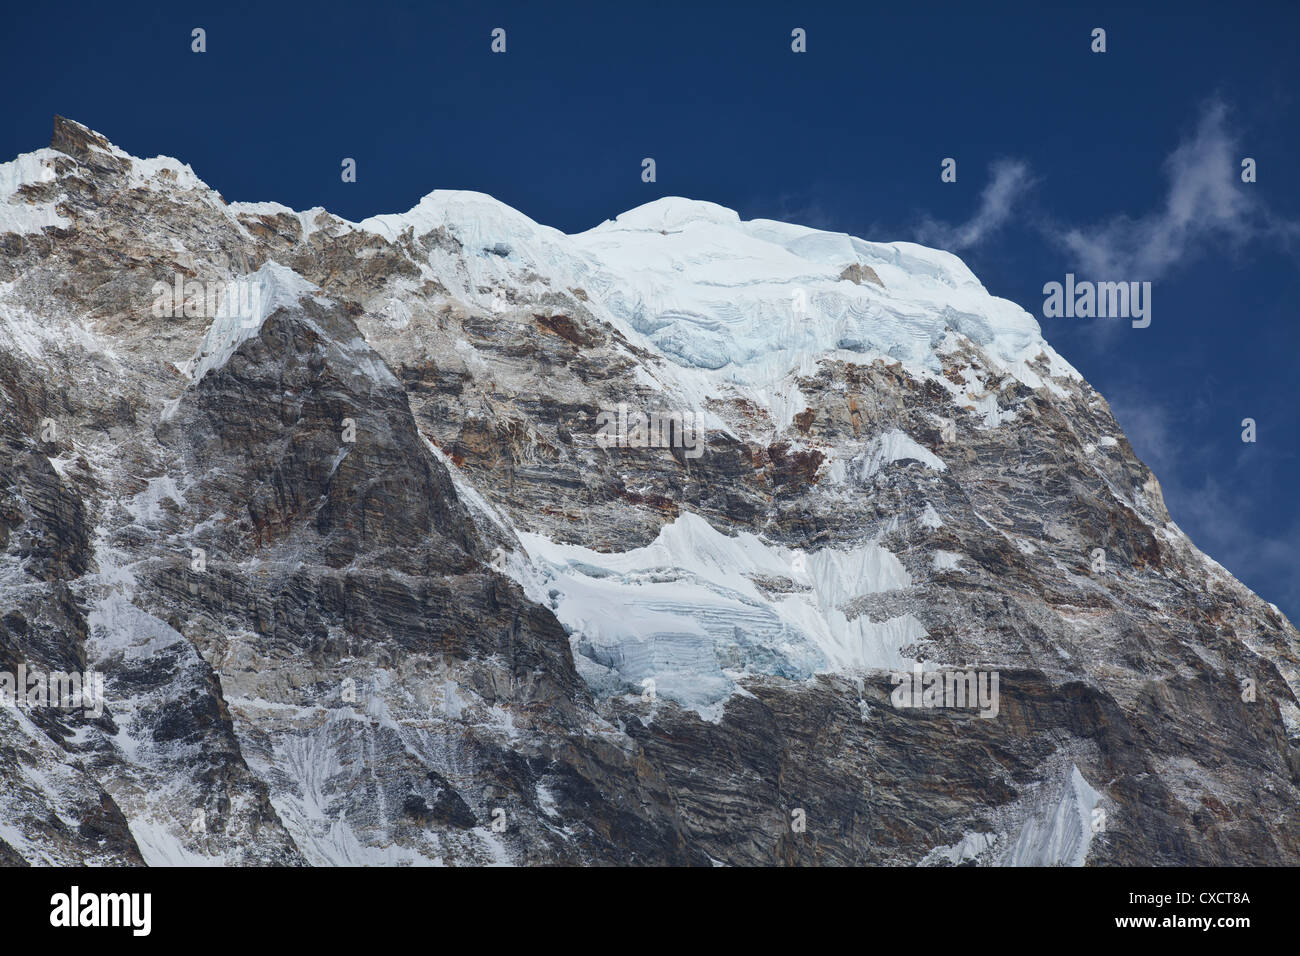 Side of a huge snowcapped mountain, Langtang Valley, Nepal Stock Photo